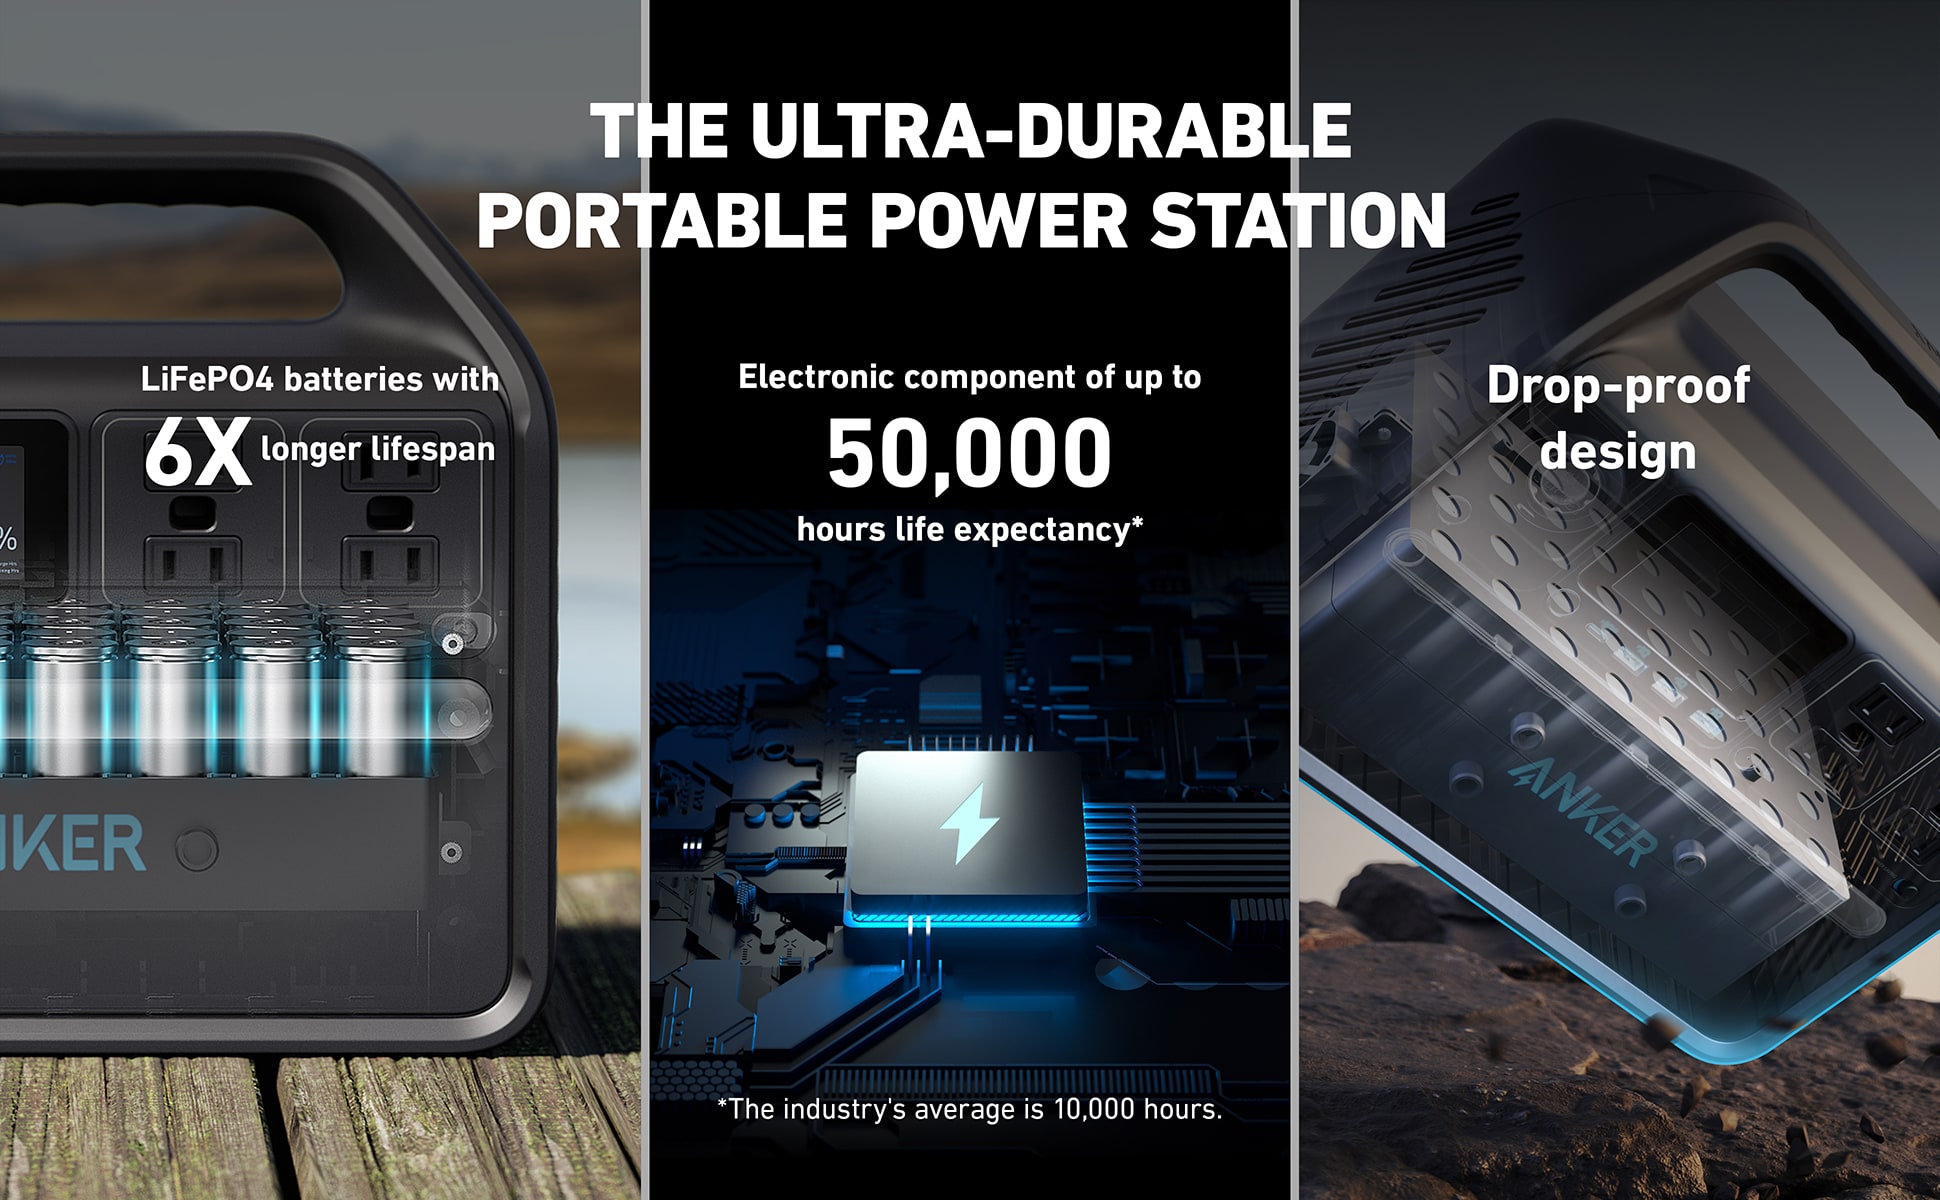 The Ultra durable portable power station